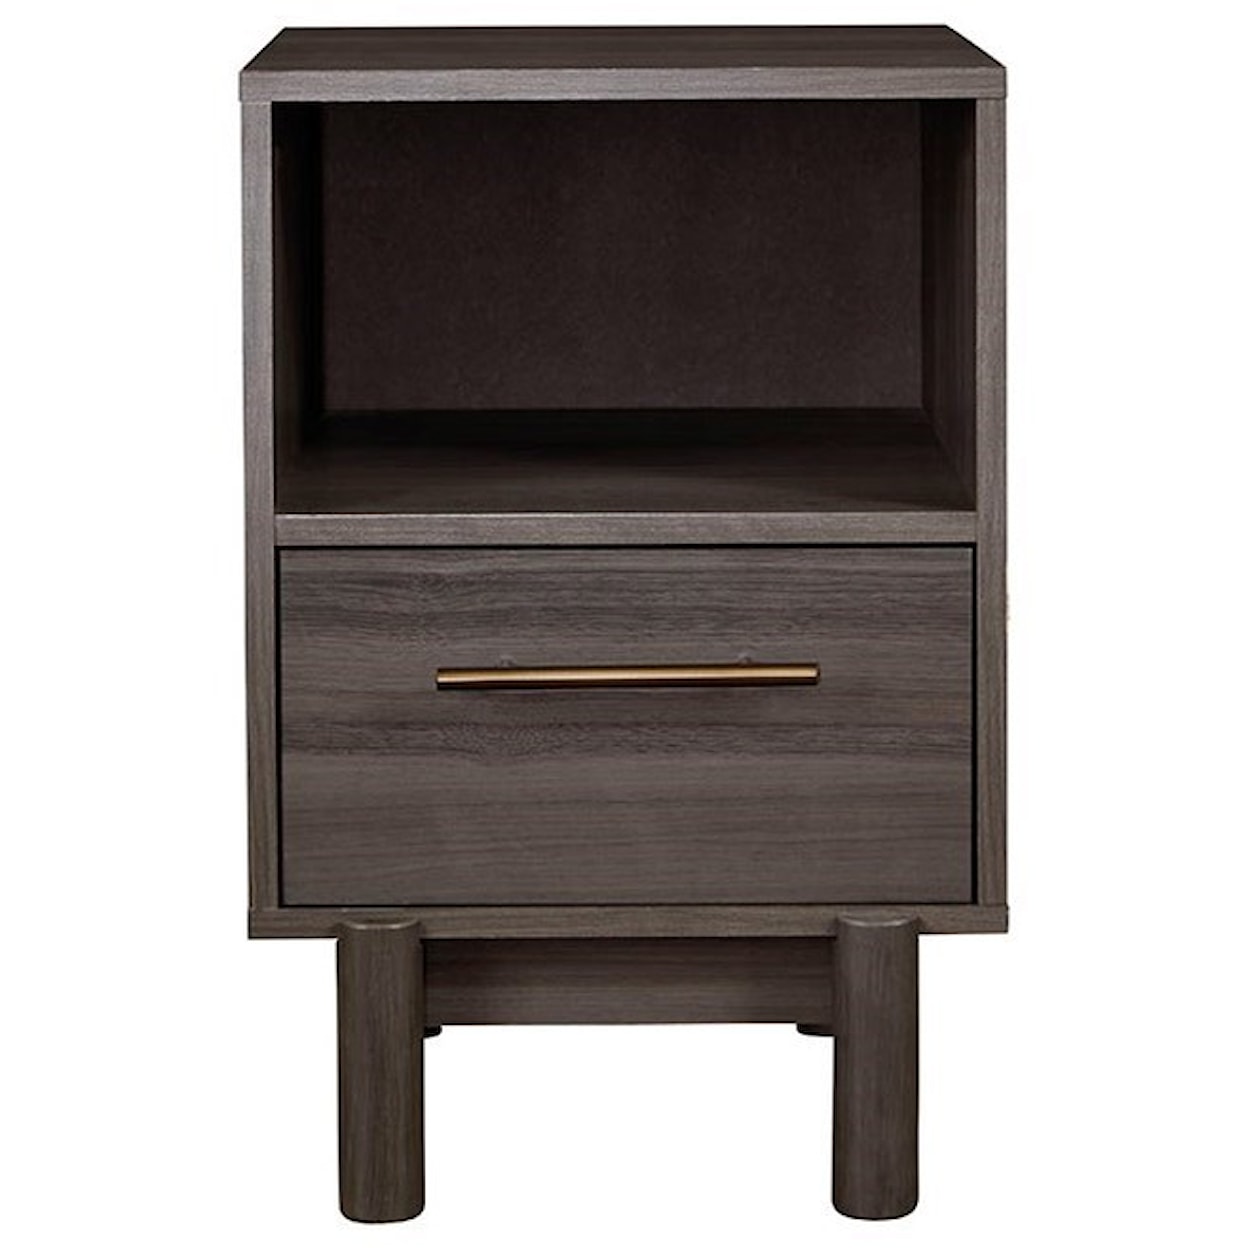 Signature Design by Ashley Brymont Nightstand